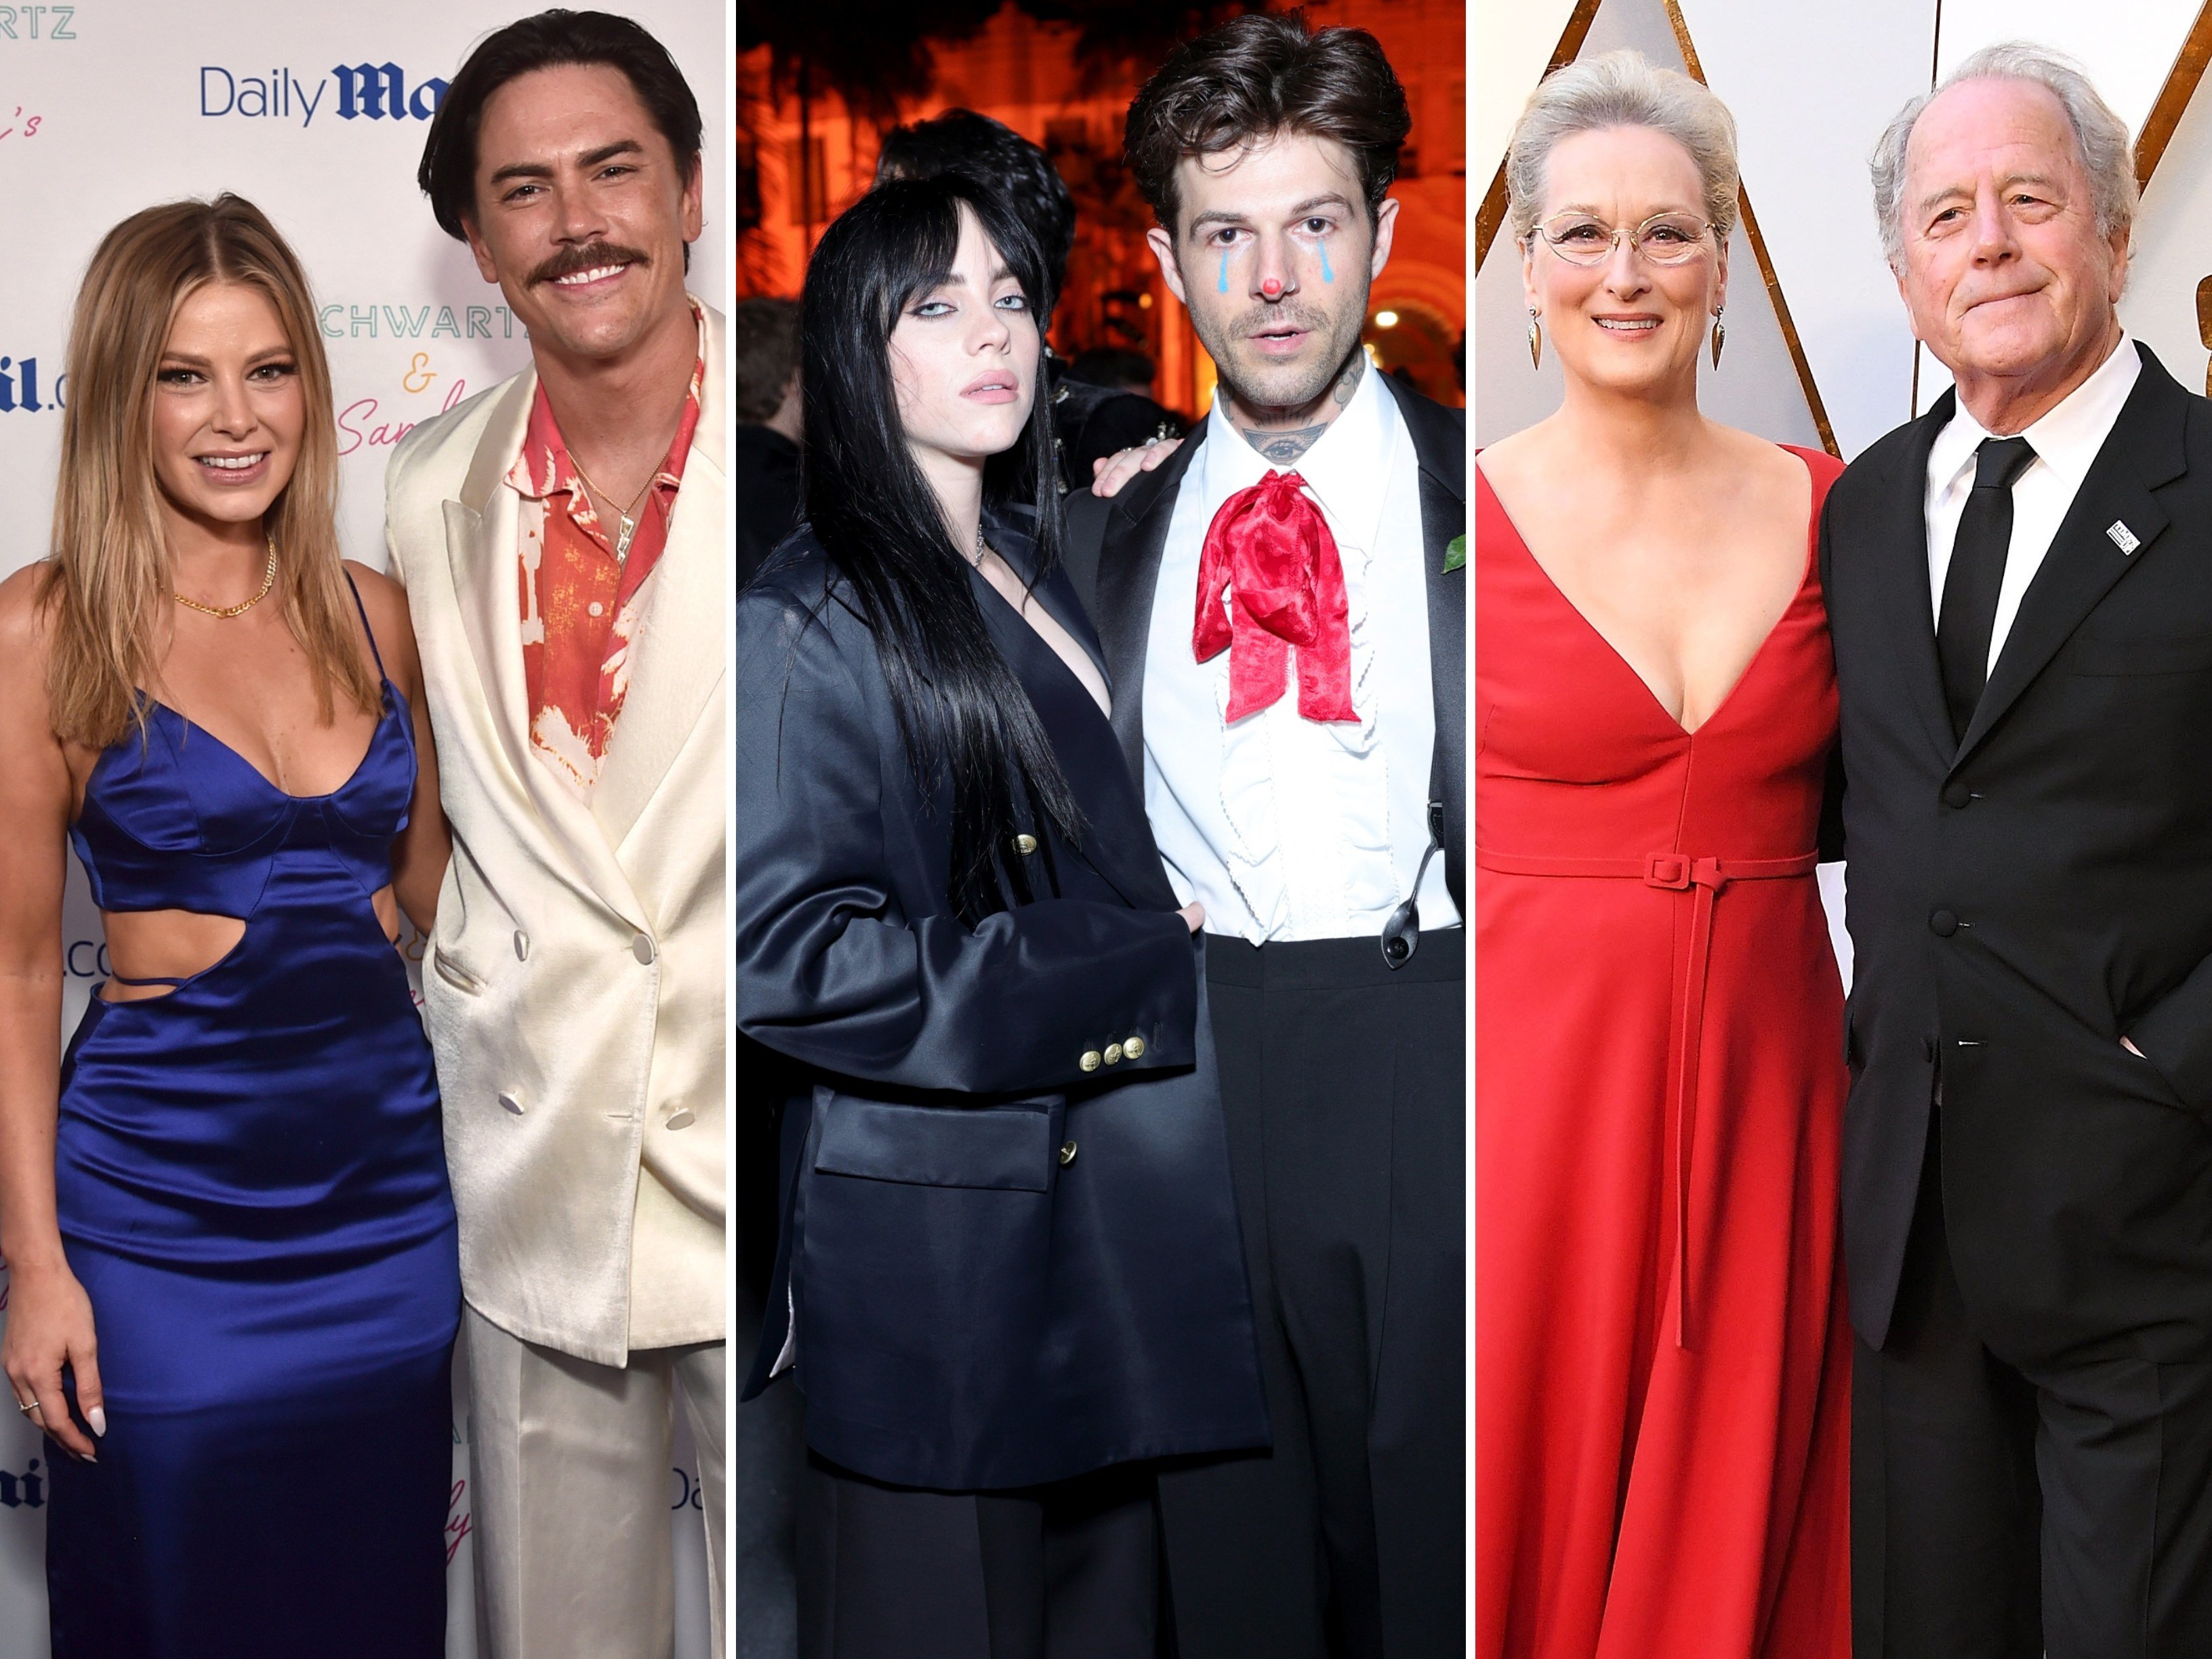 Ariana Madix and Tom Sandoval, Billie Eilish and Jesse Rutherford, and Meryl Streep and Don Gummer all broke up this year. Photos: Getty Images